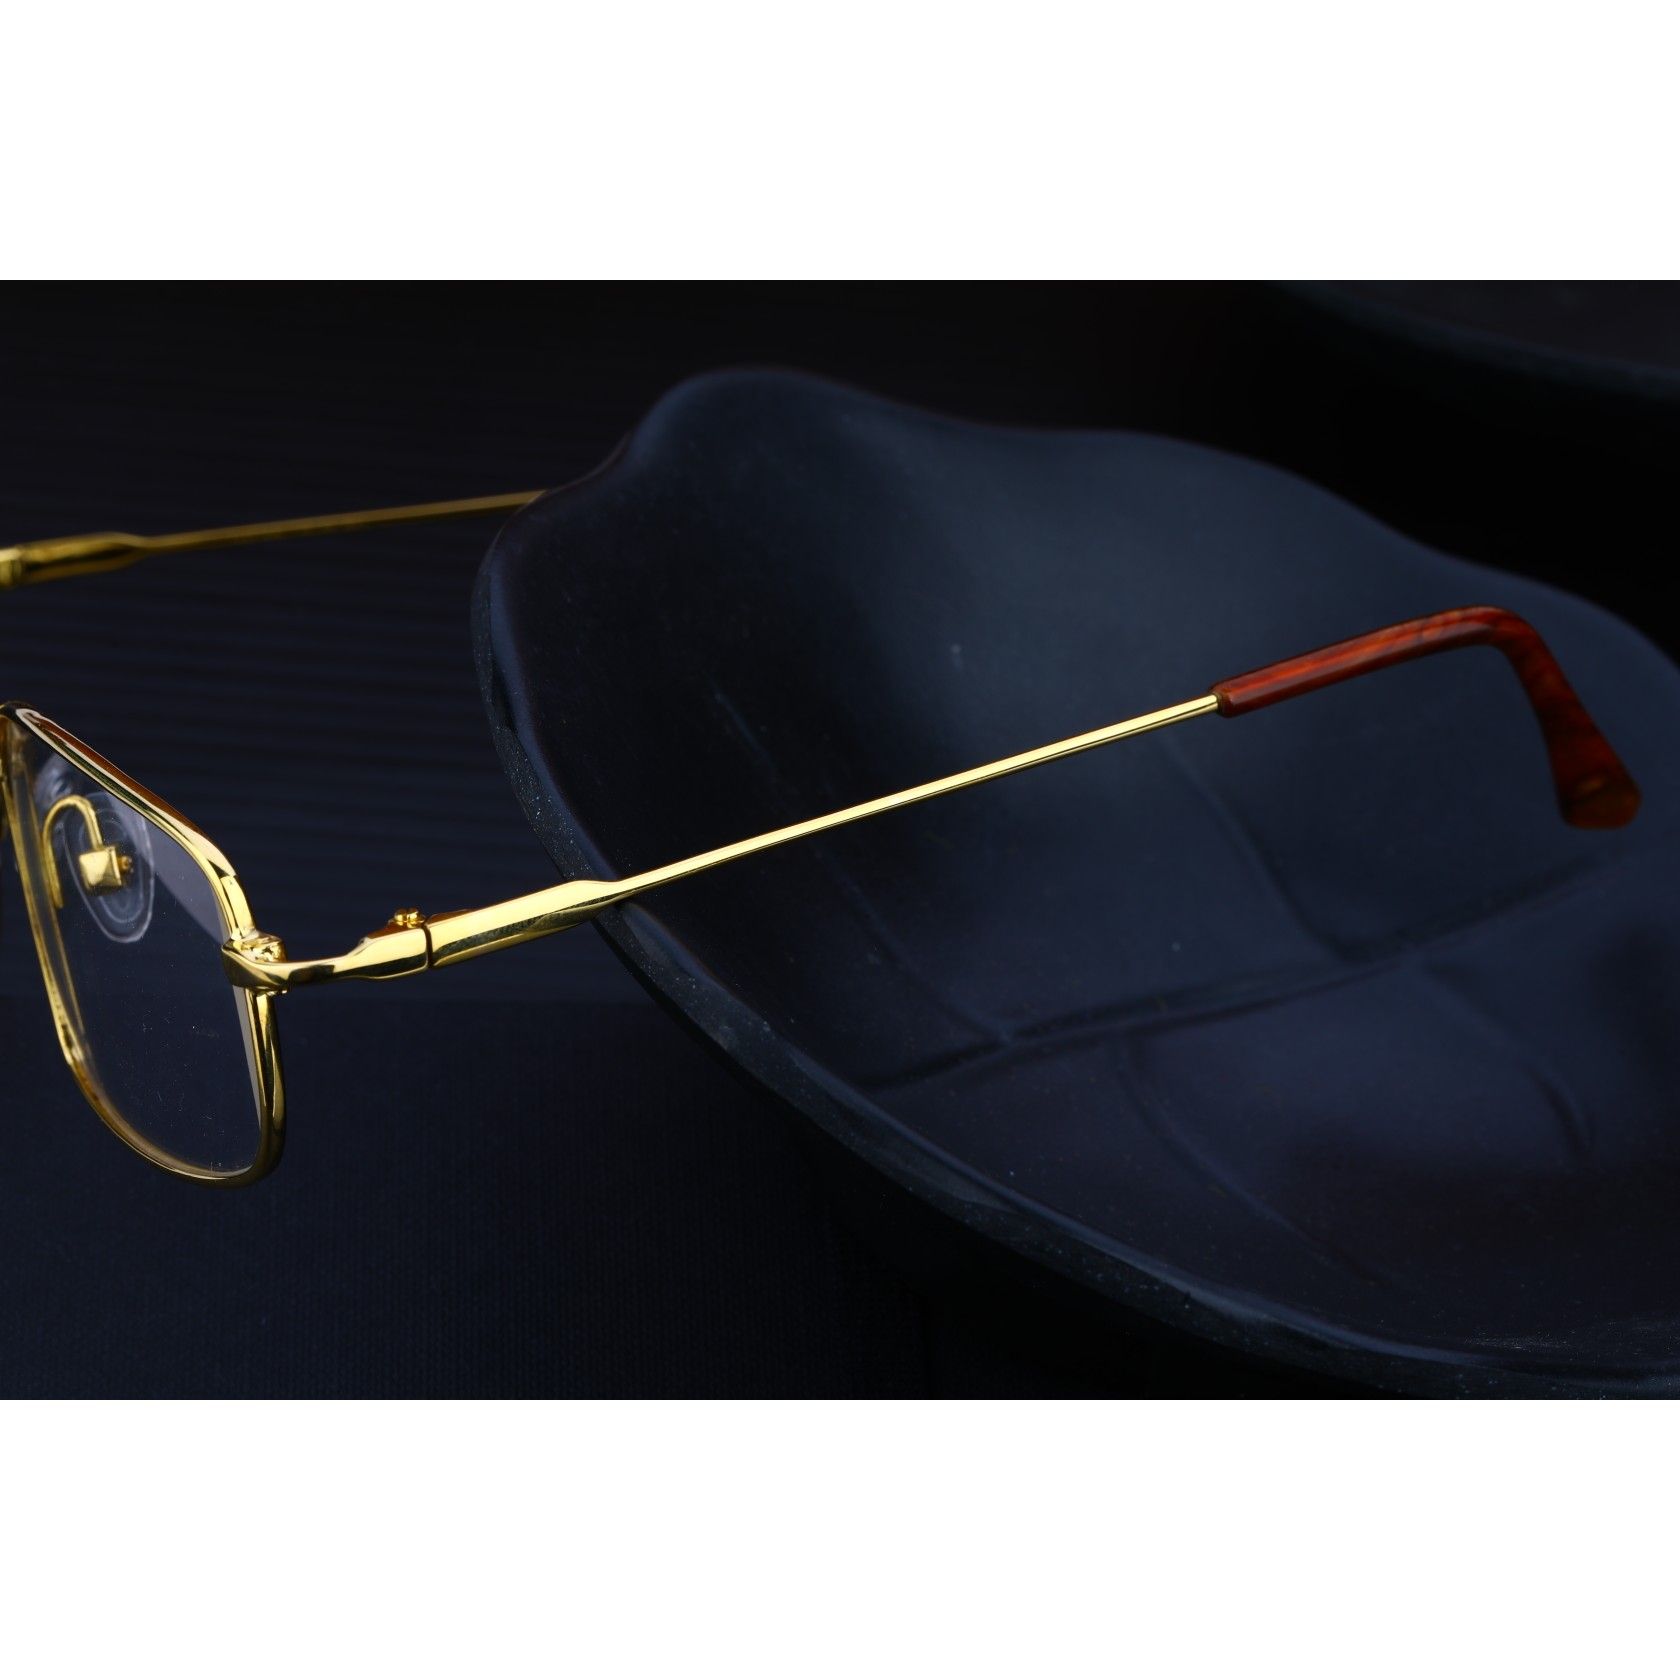 Mens Gold Spectacles-S01